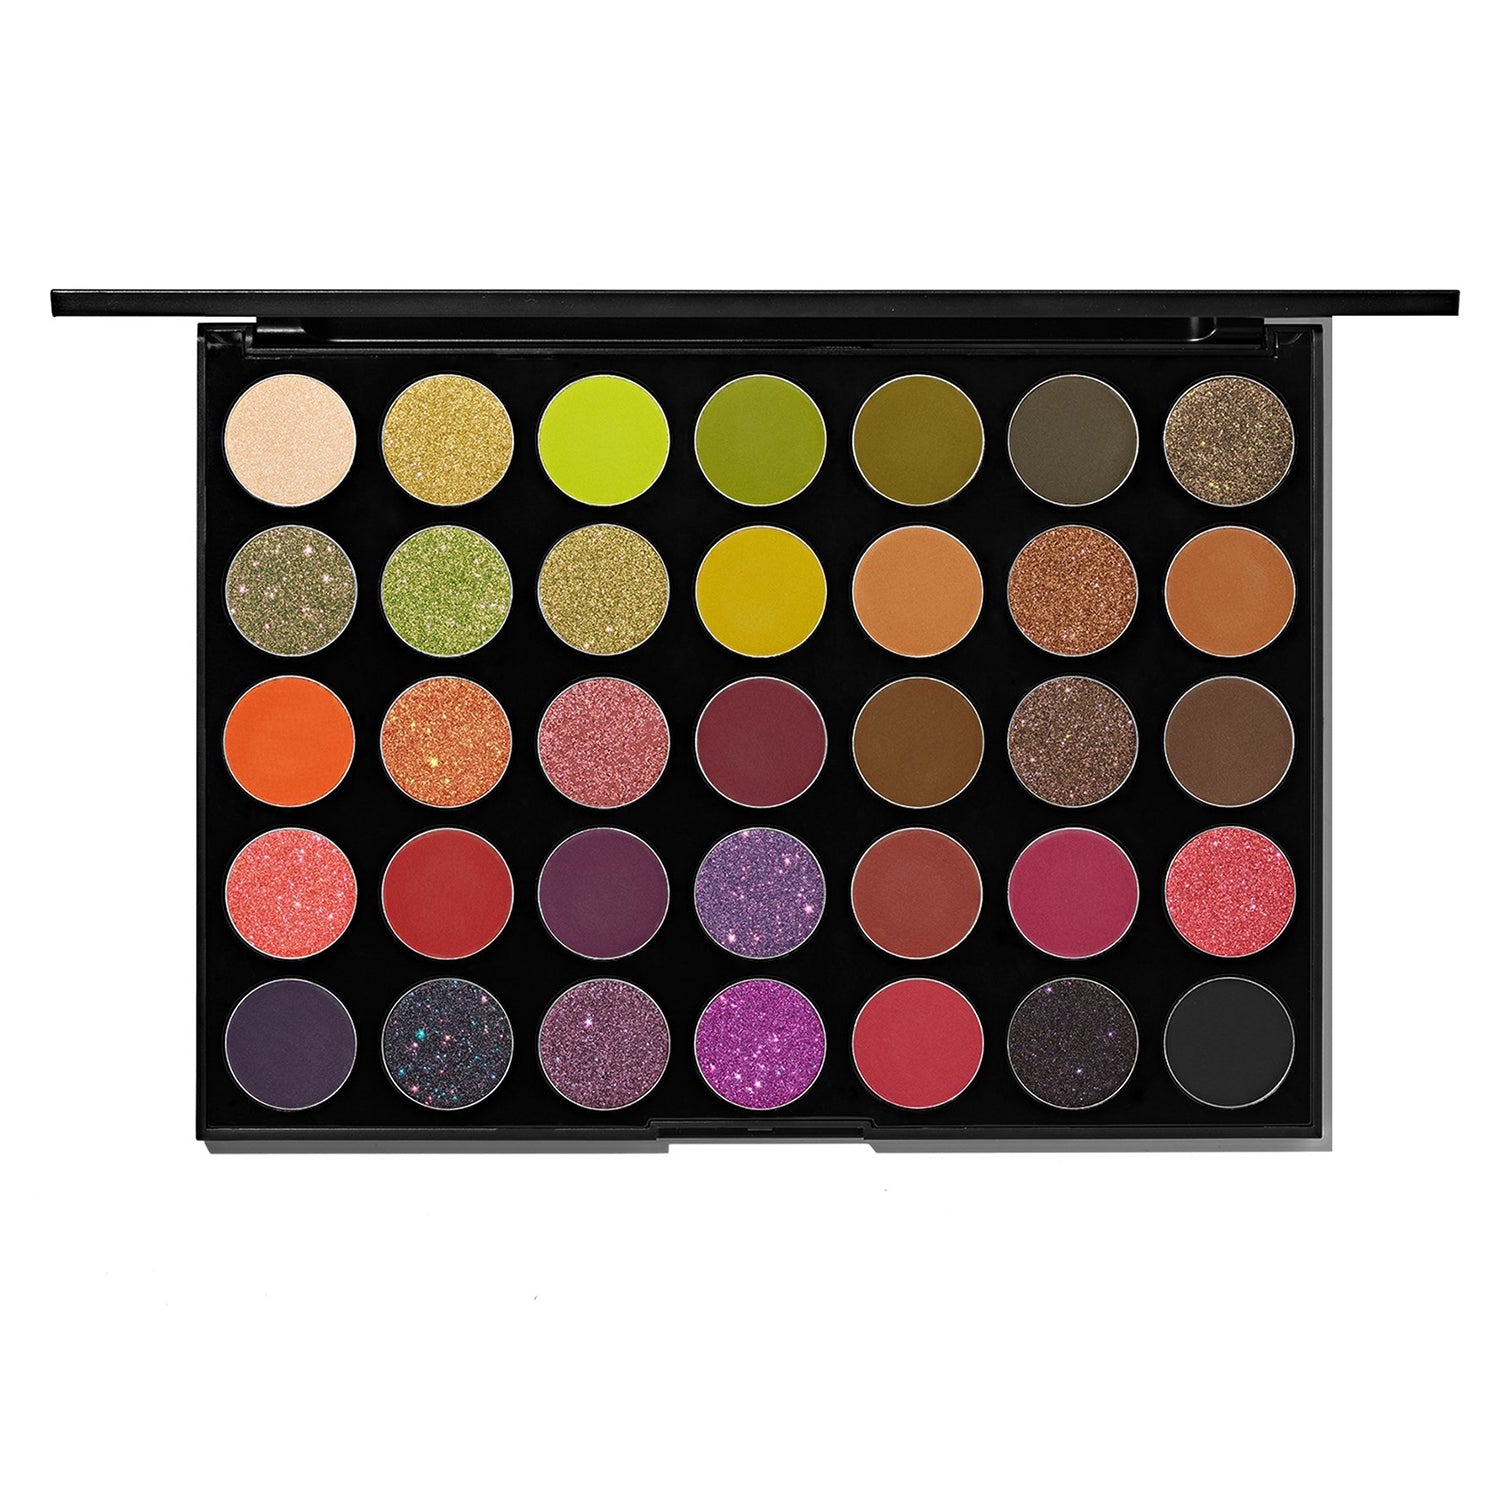 Shop 100% original Morphe 35M eyeshadow palette available at Heygirl.pk for delivery in Pakistan